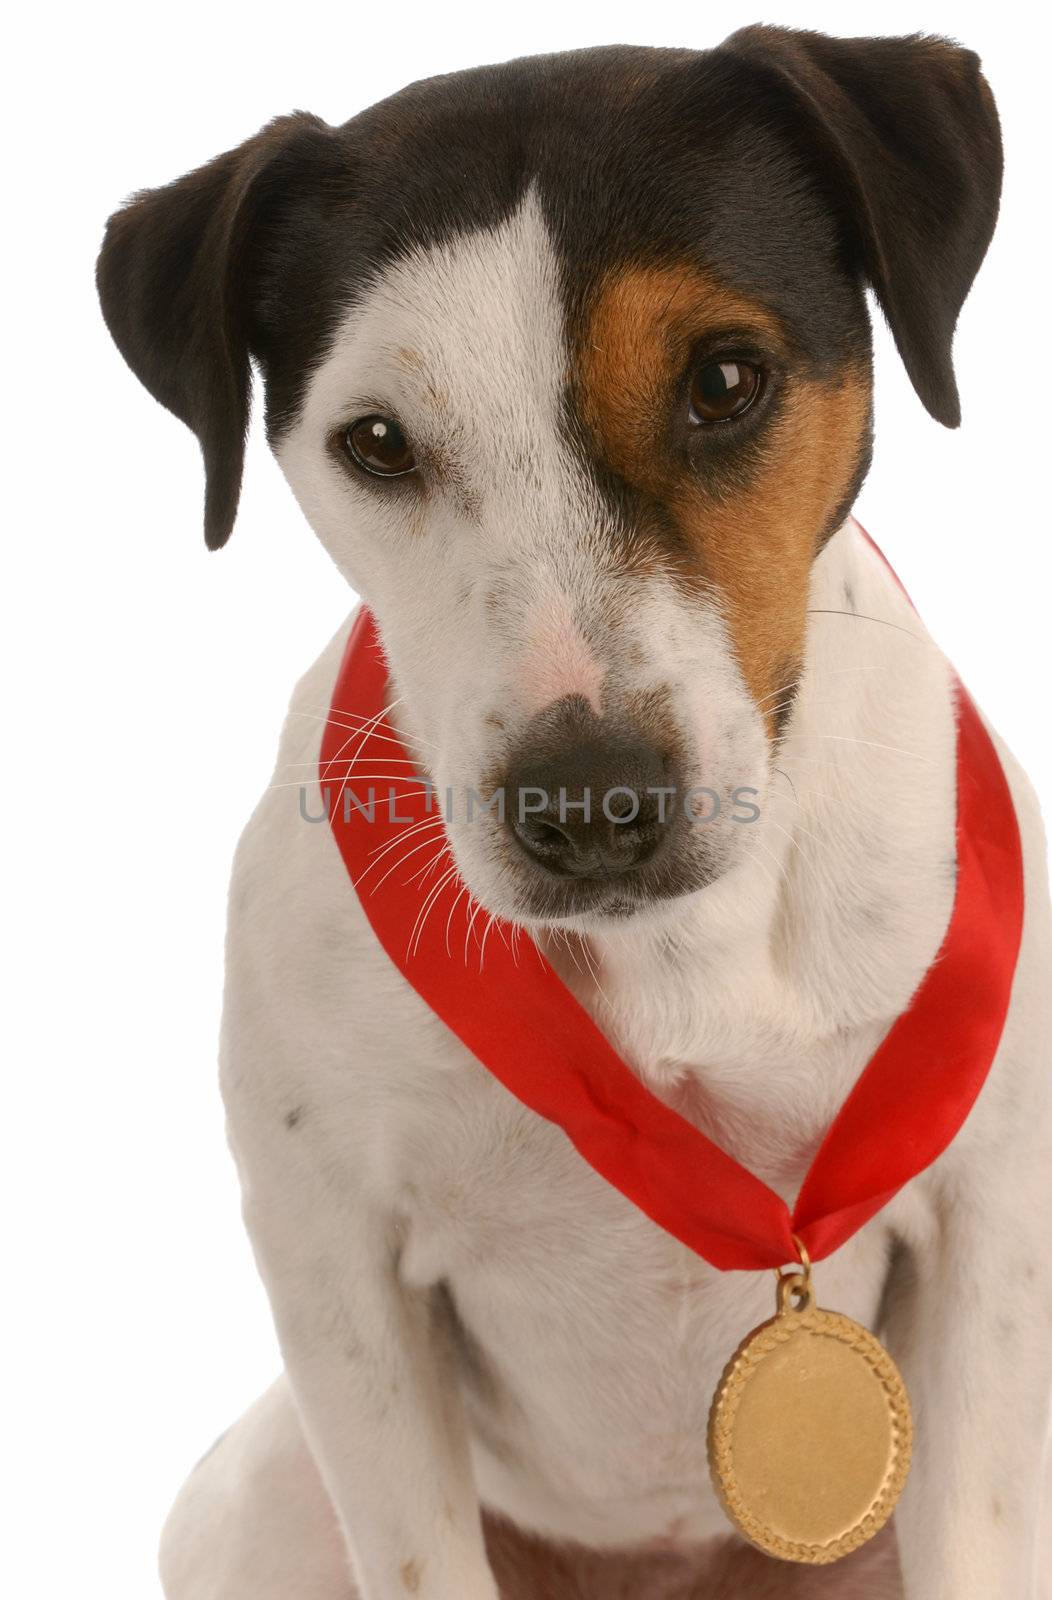  jack russel terrier with award winning medal around neck 

